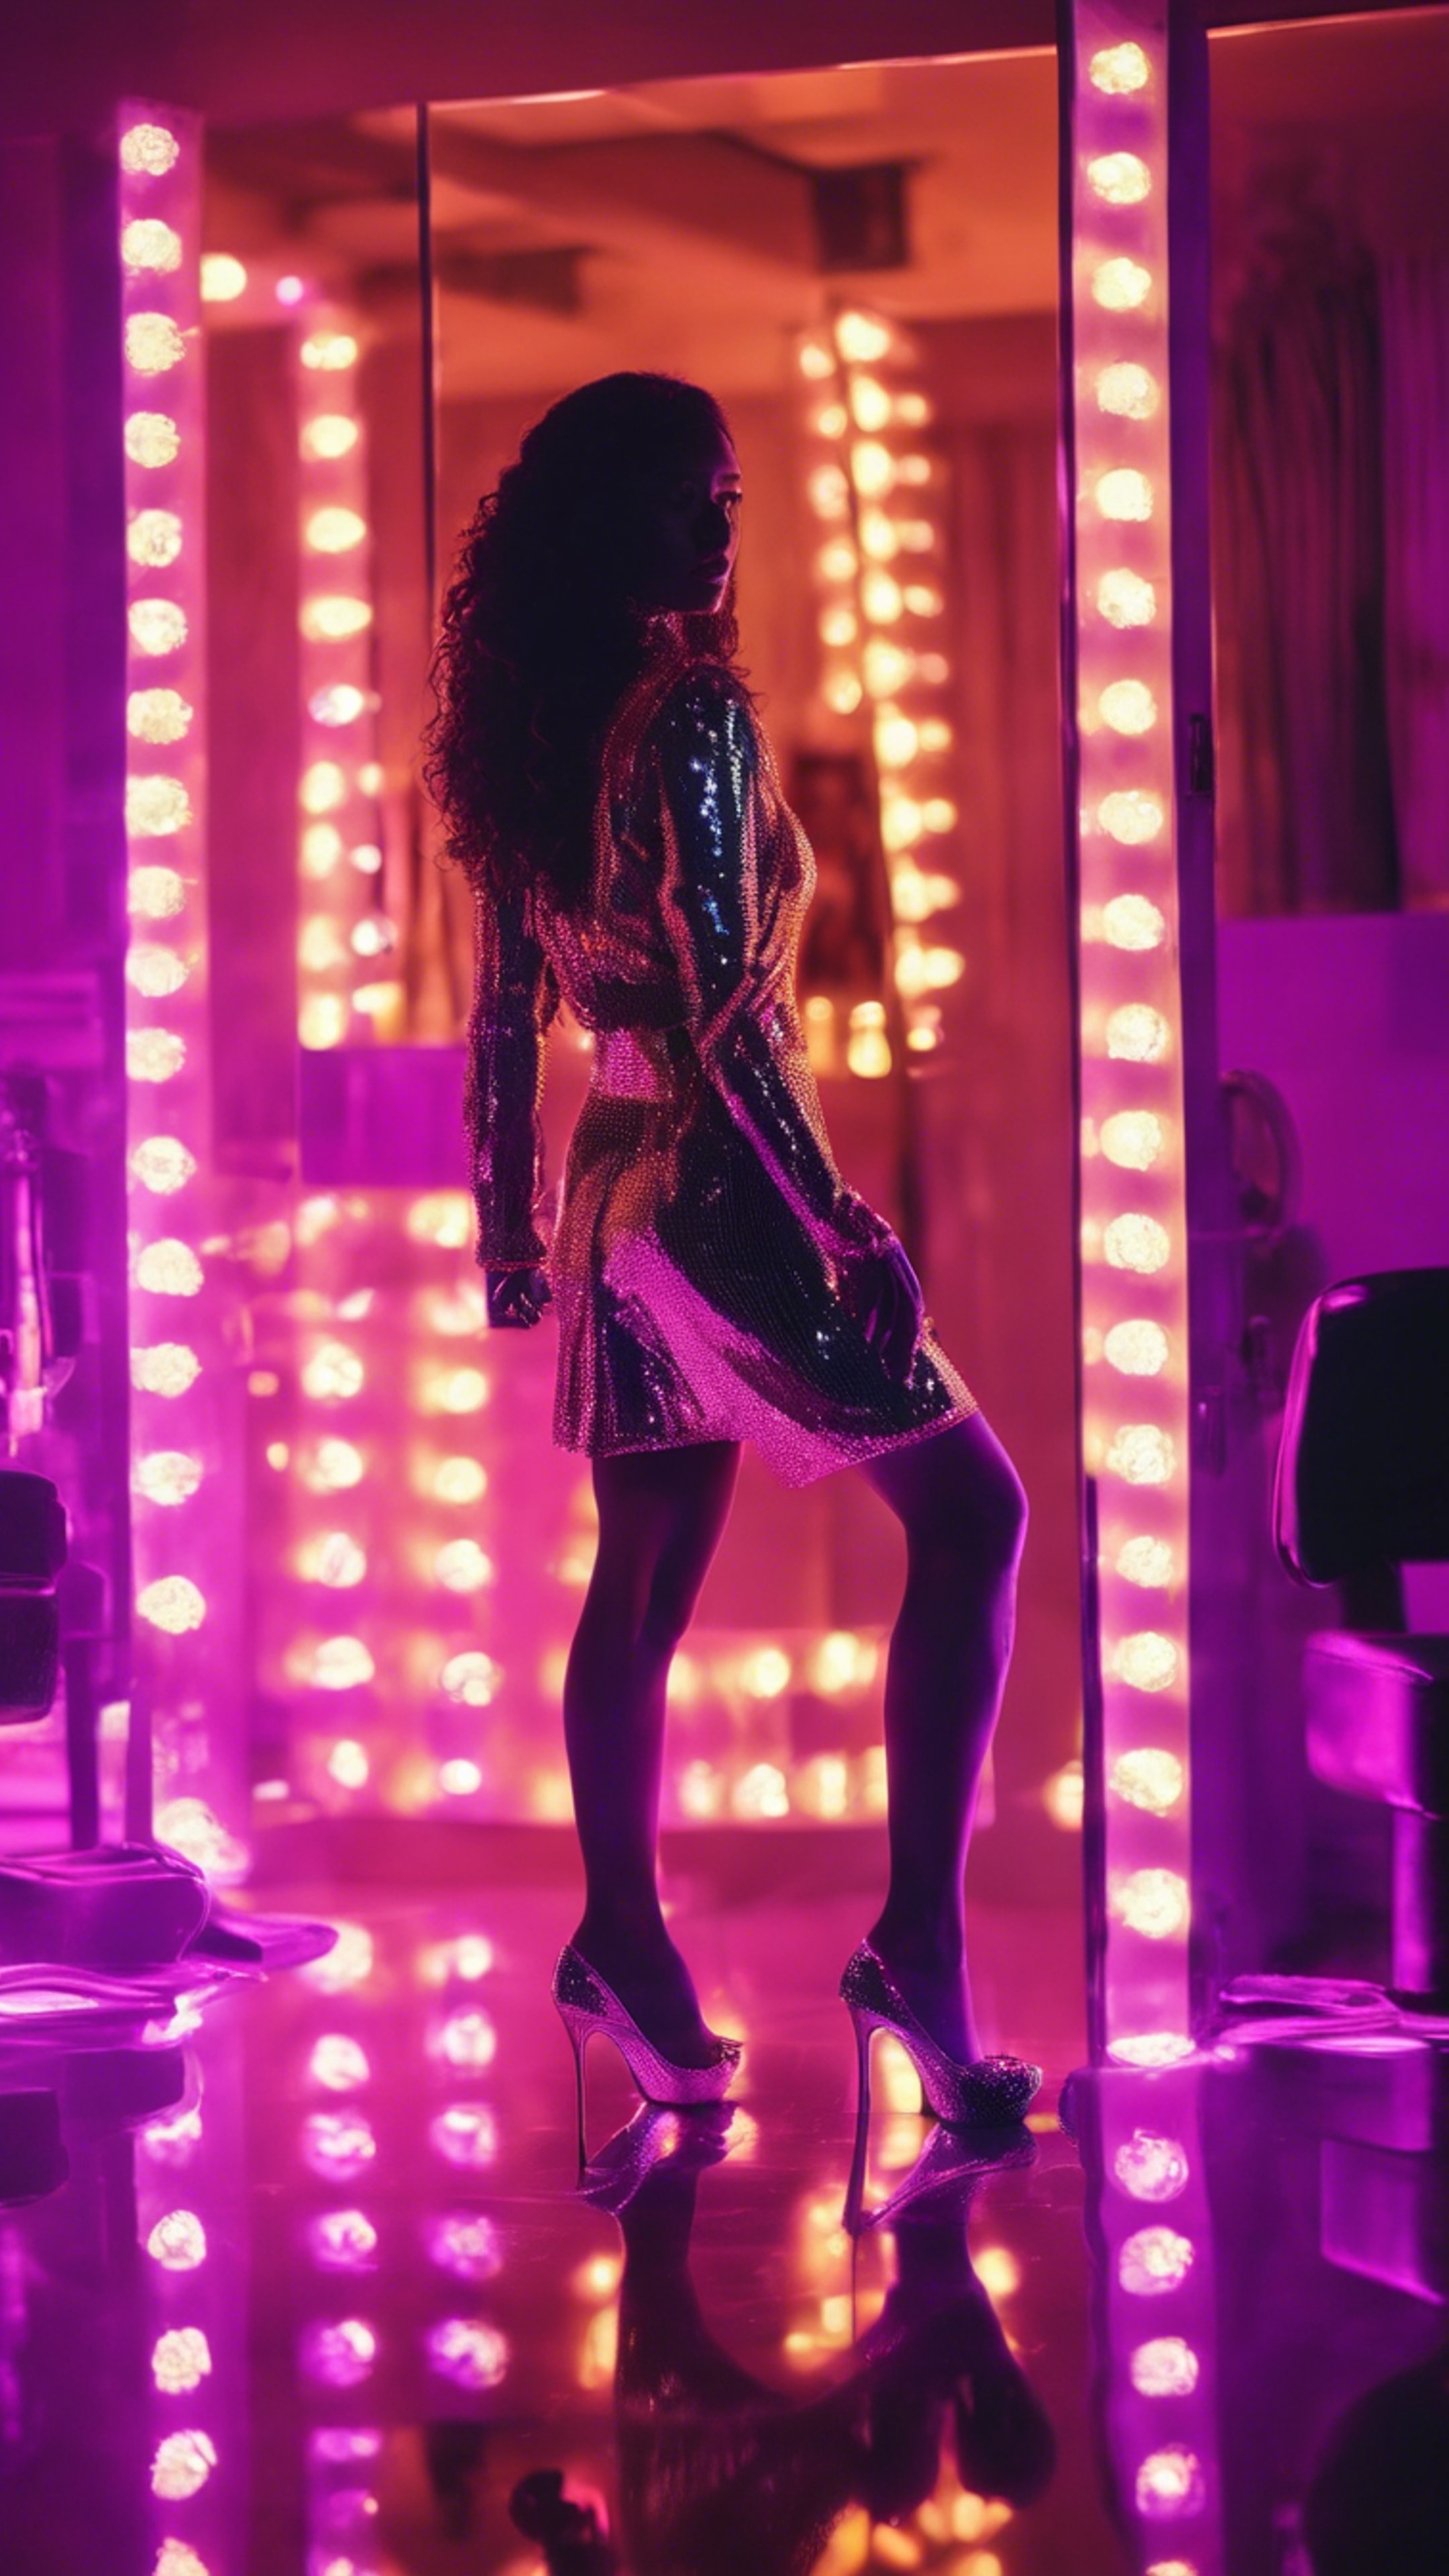 A confident baddie in a neon-lit room, dressed in sequins and high heels, her silhouette reflecting in the mirror. Tapeta[dd190a8a8fd944b882f7]